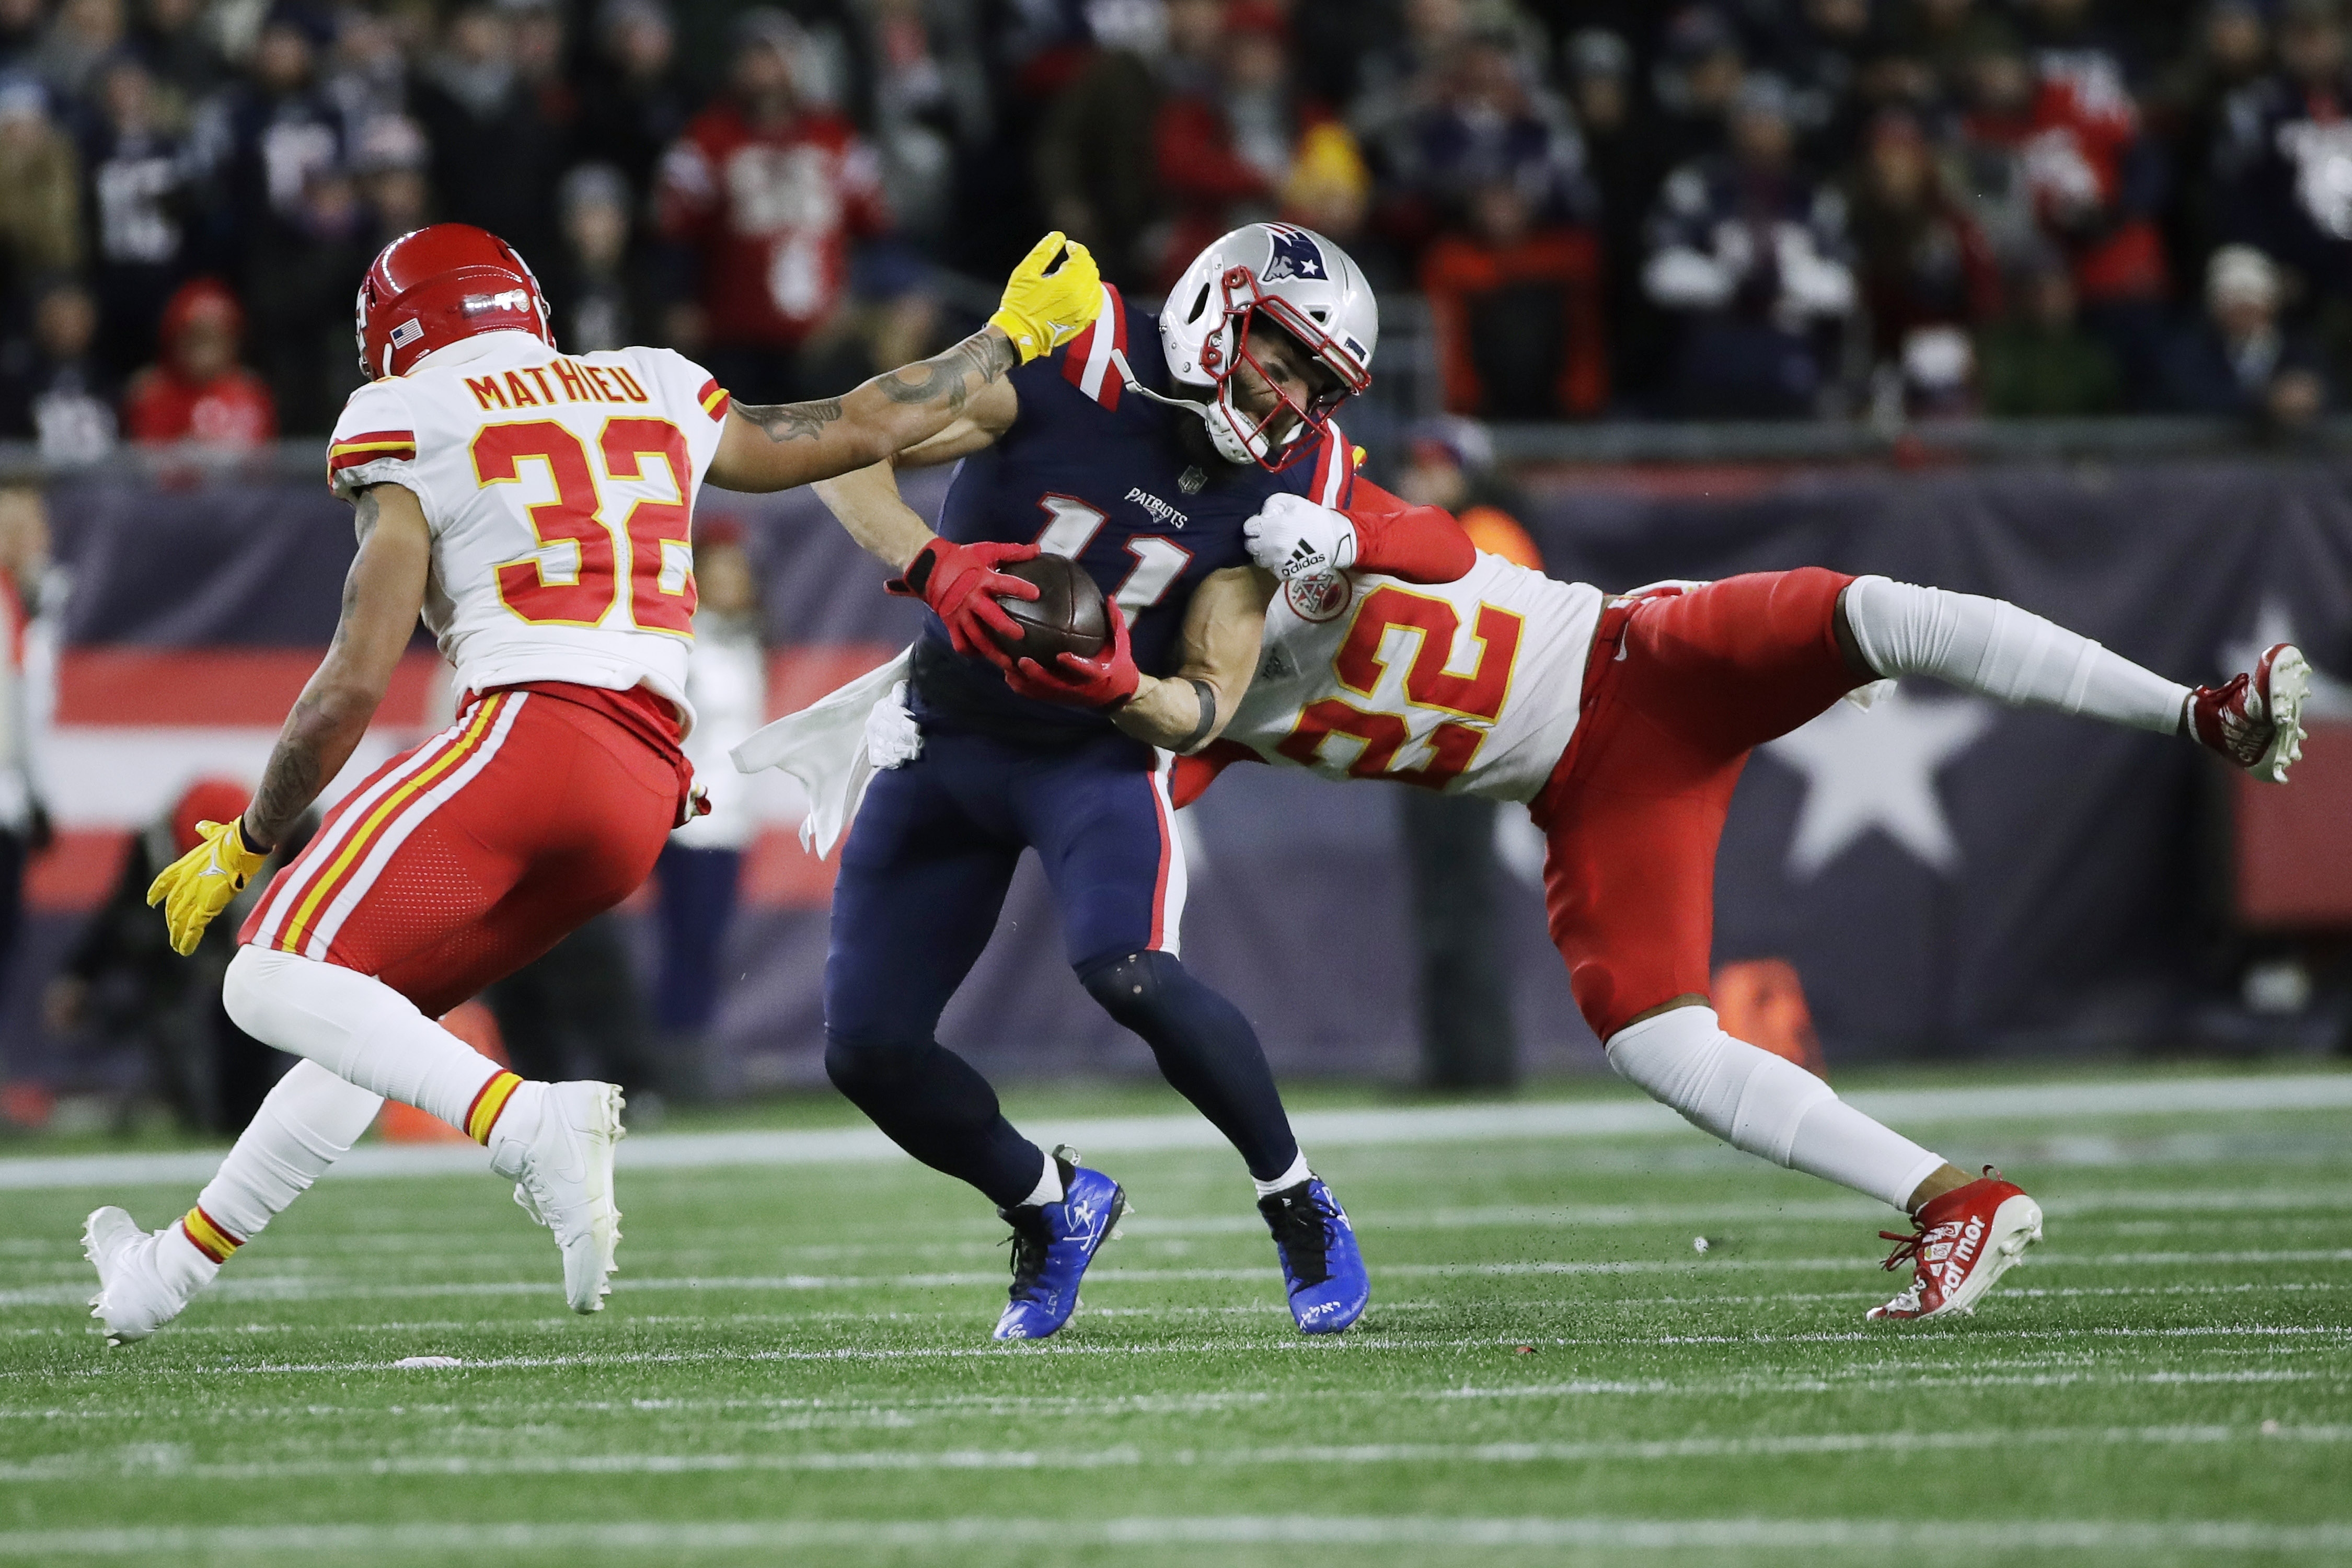 Chiefs lean on defense to beat Patriots in New England